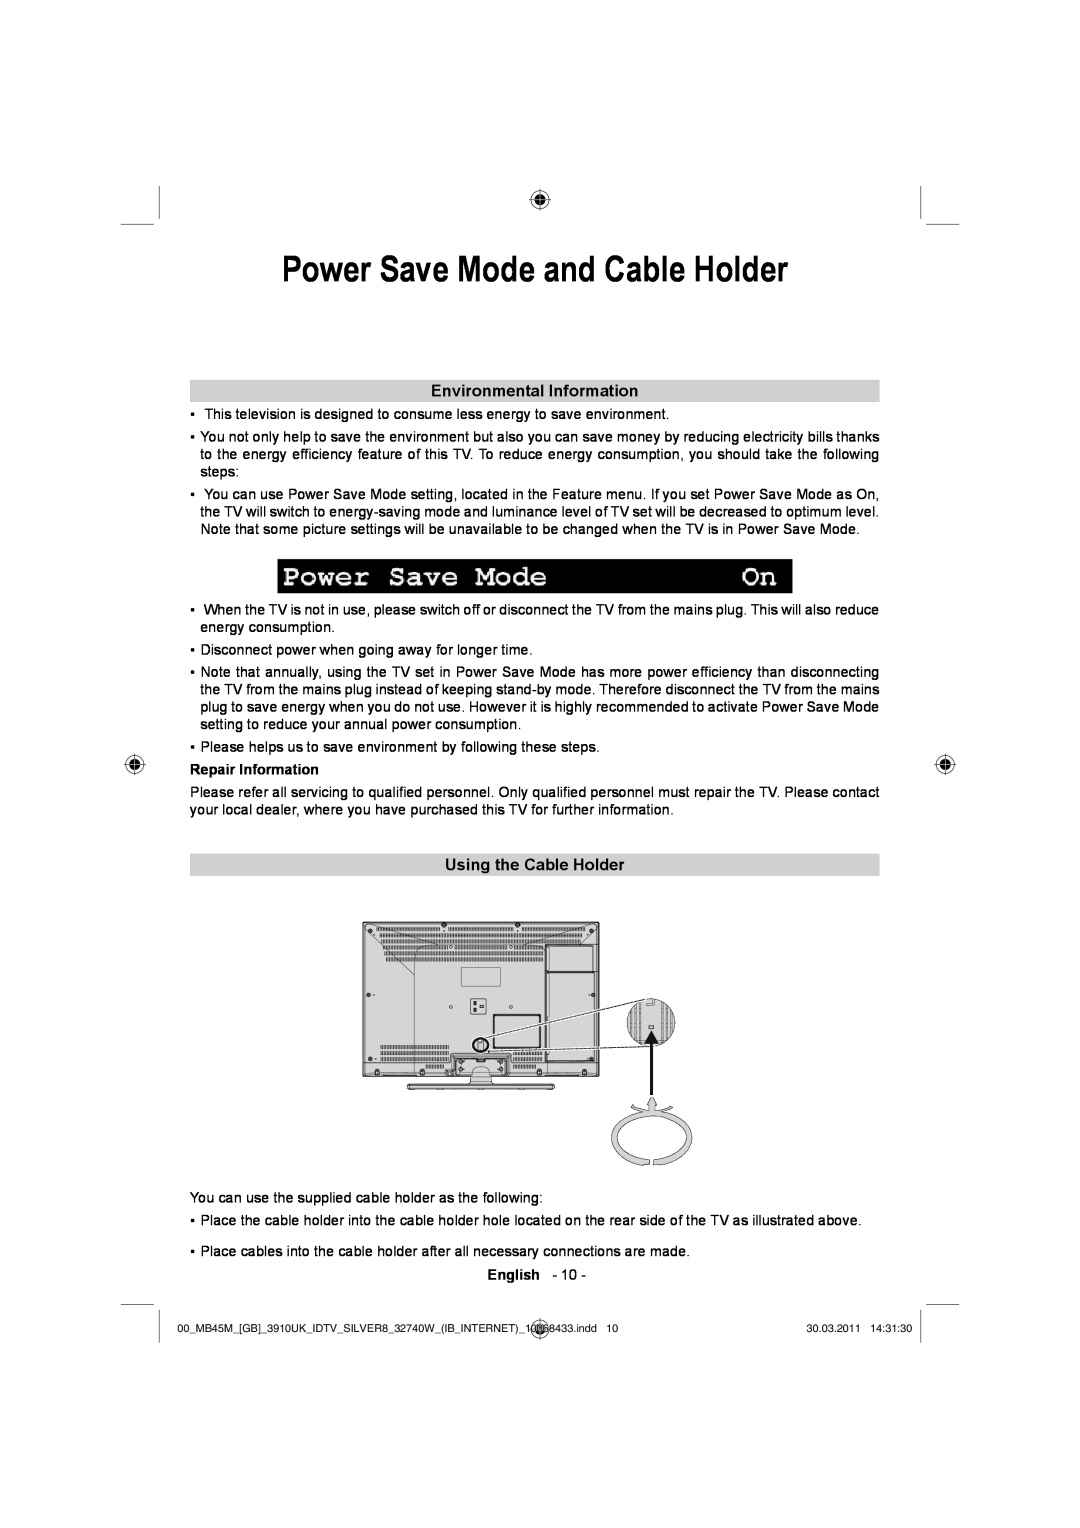 Toshiba 32BV500B owner manual Power Save Mode and Cable Holder, Environmental Information, Using the Cable Holder 